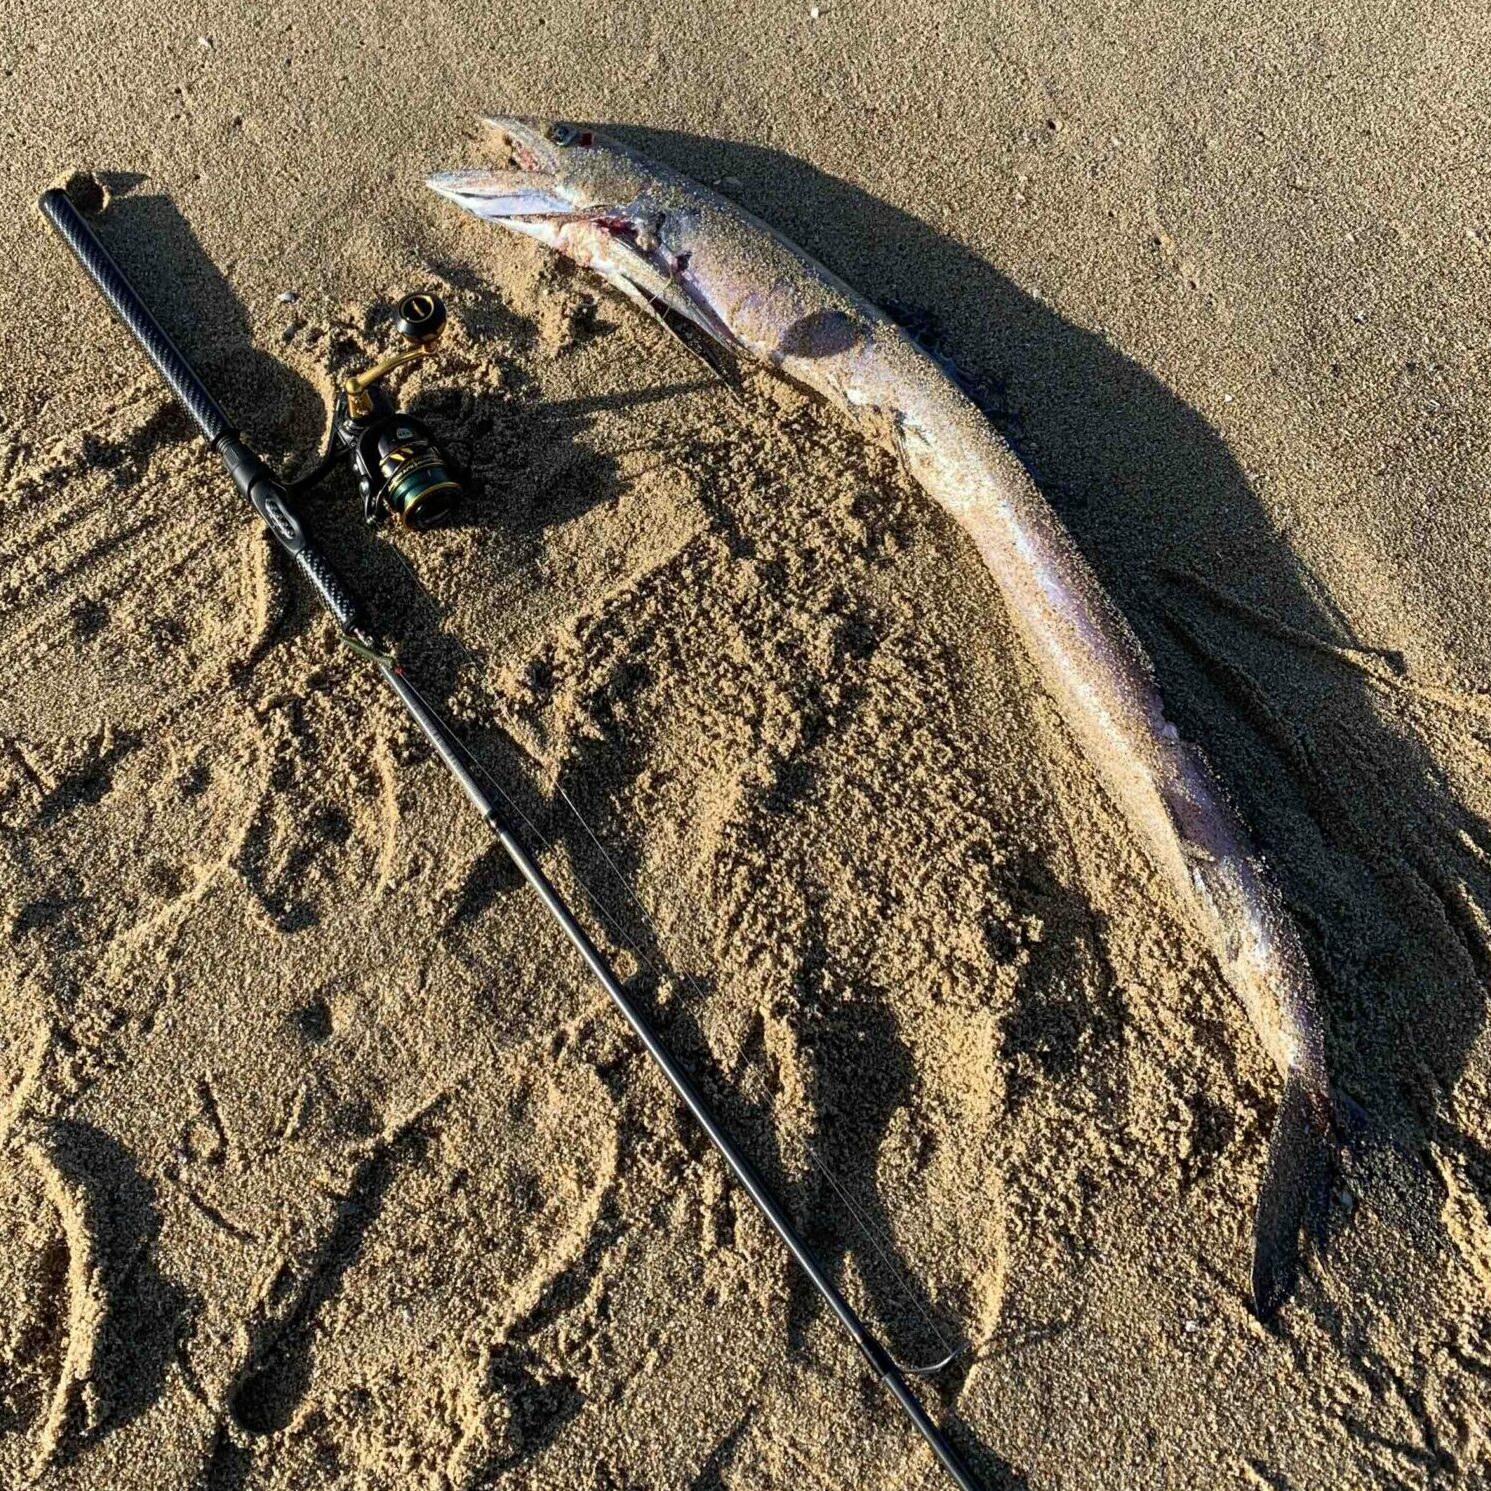 Saltwater – Elusive (and slightly scary) deep-water fish washes up